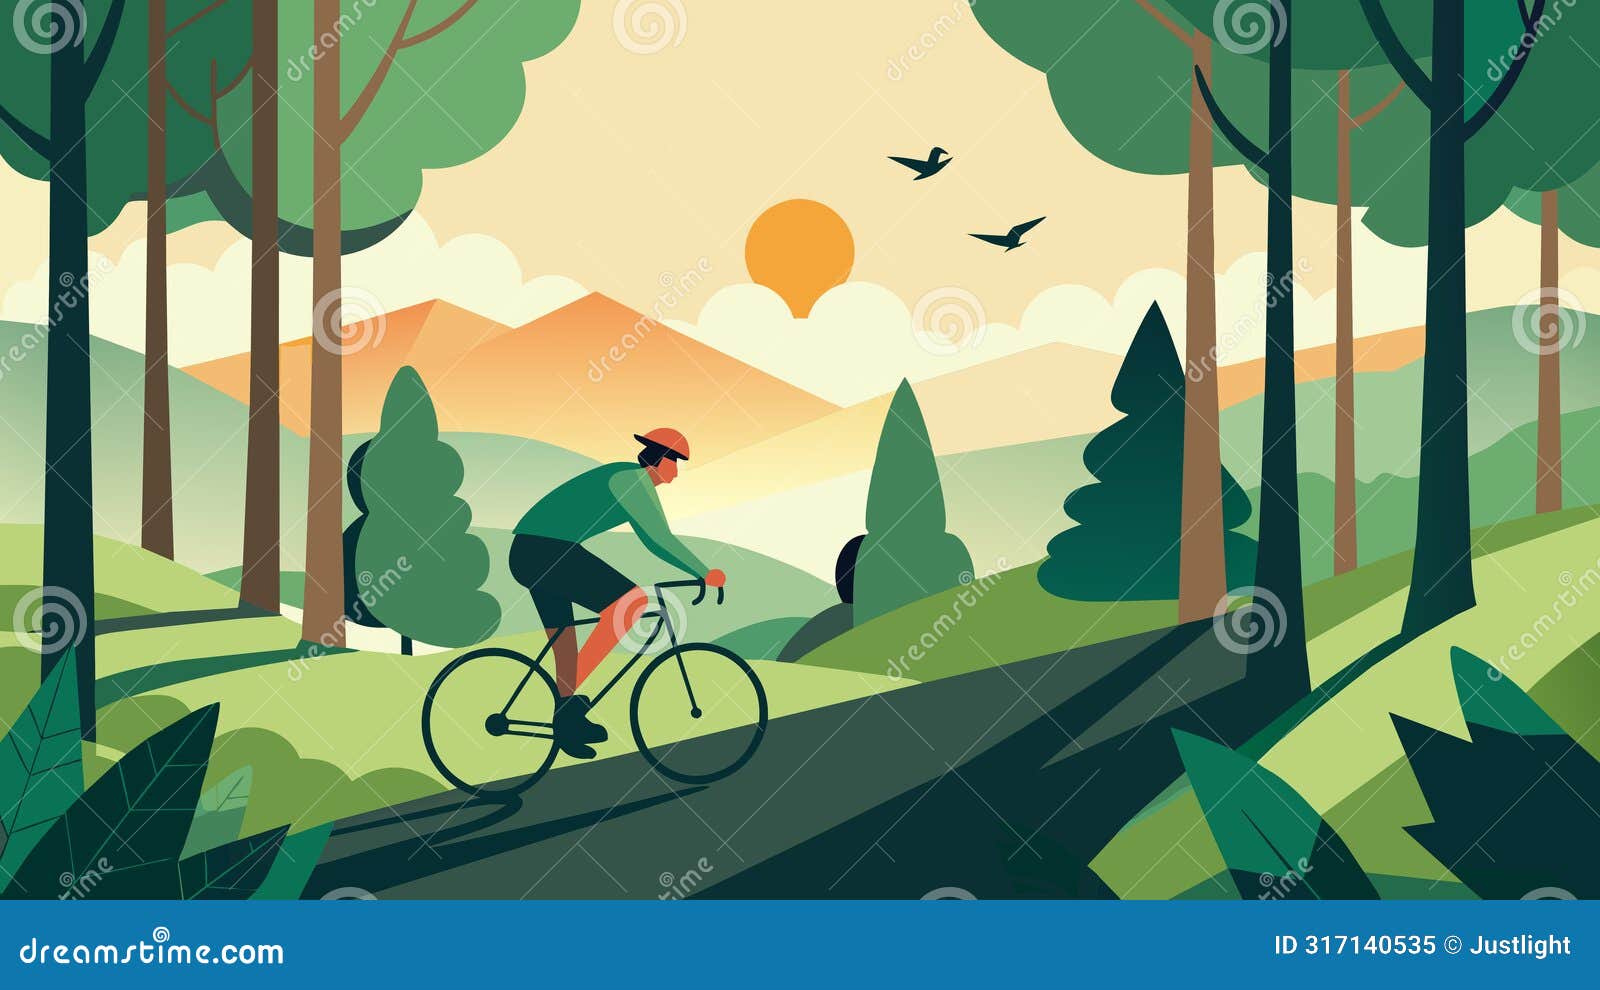 a solo rider pedaling through a peaceful forest the sunlight peeking through the tall trees and birds chirping in the